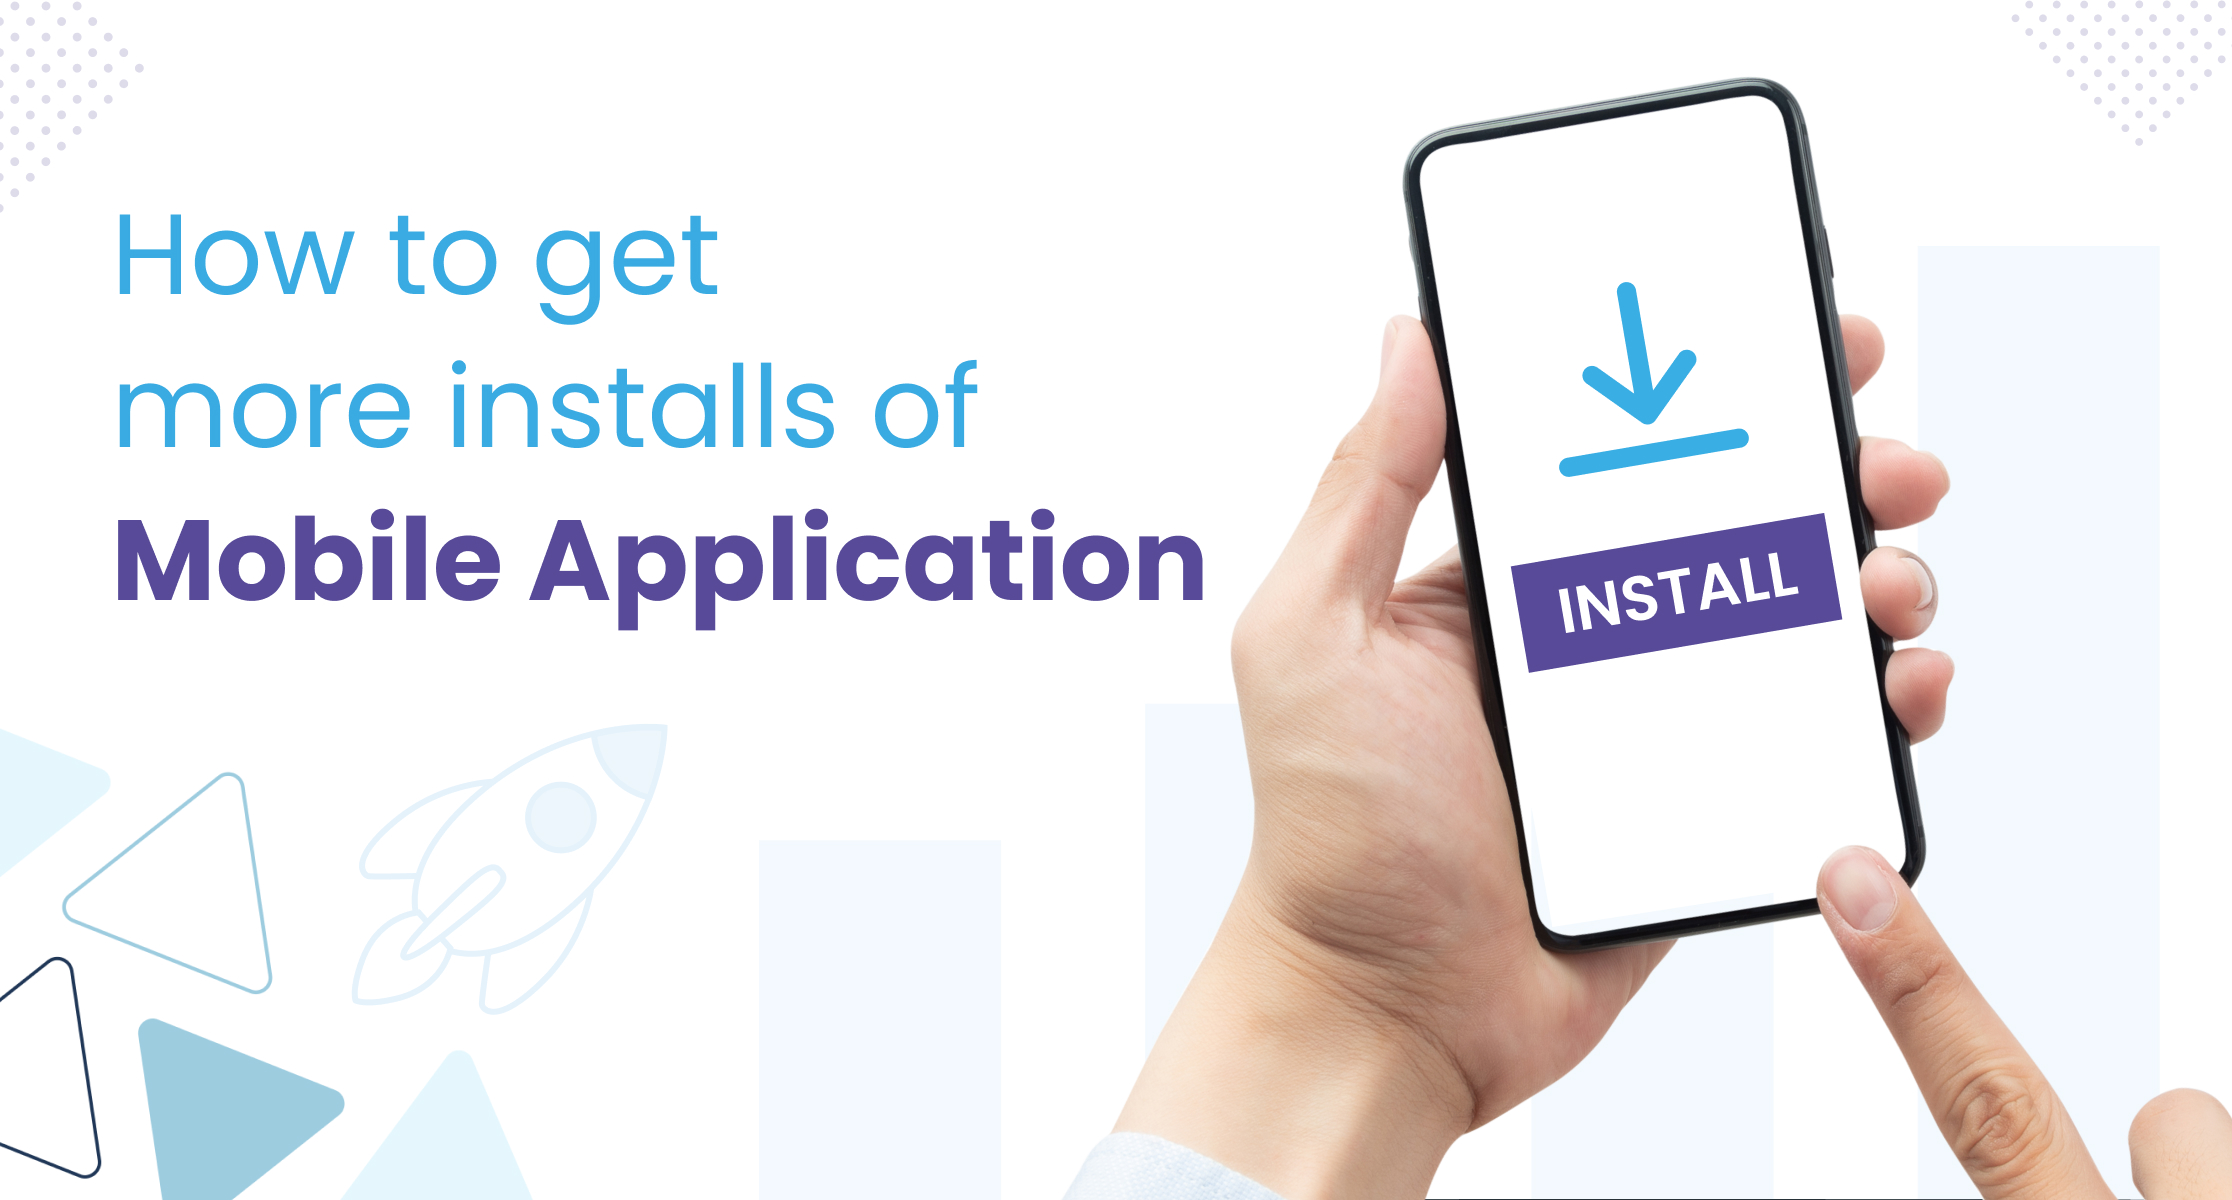 How to get more installs of Mobile Application